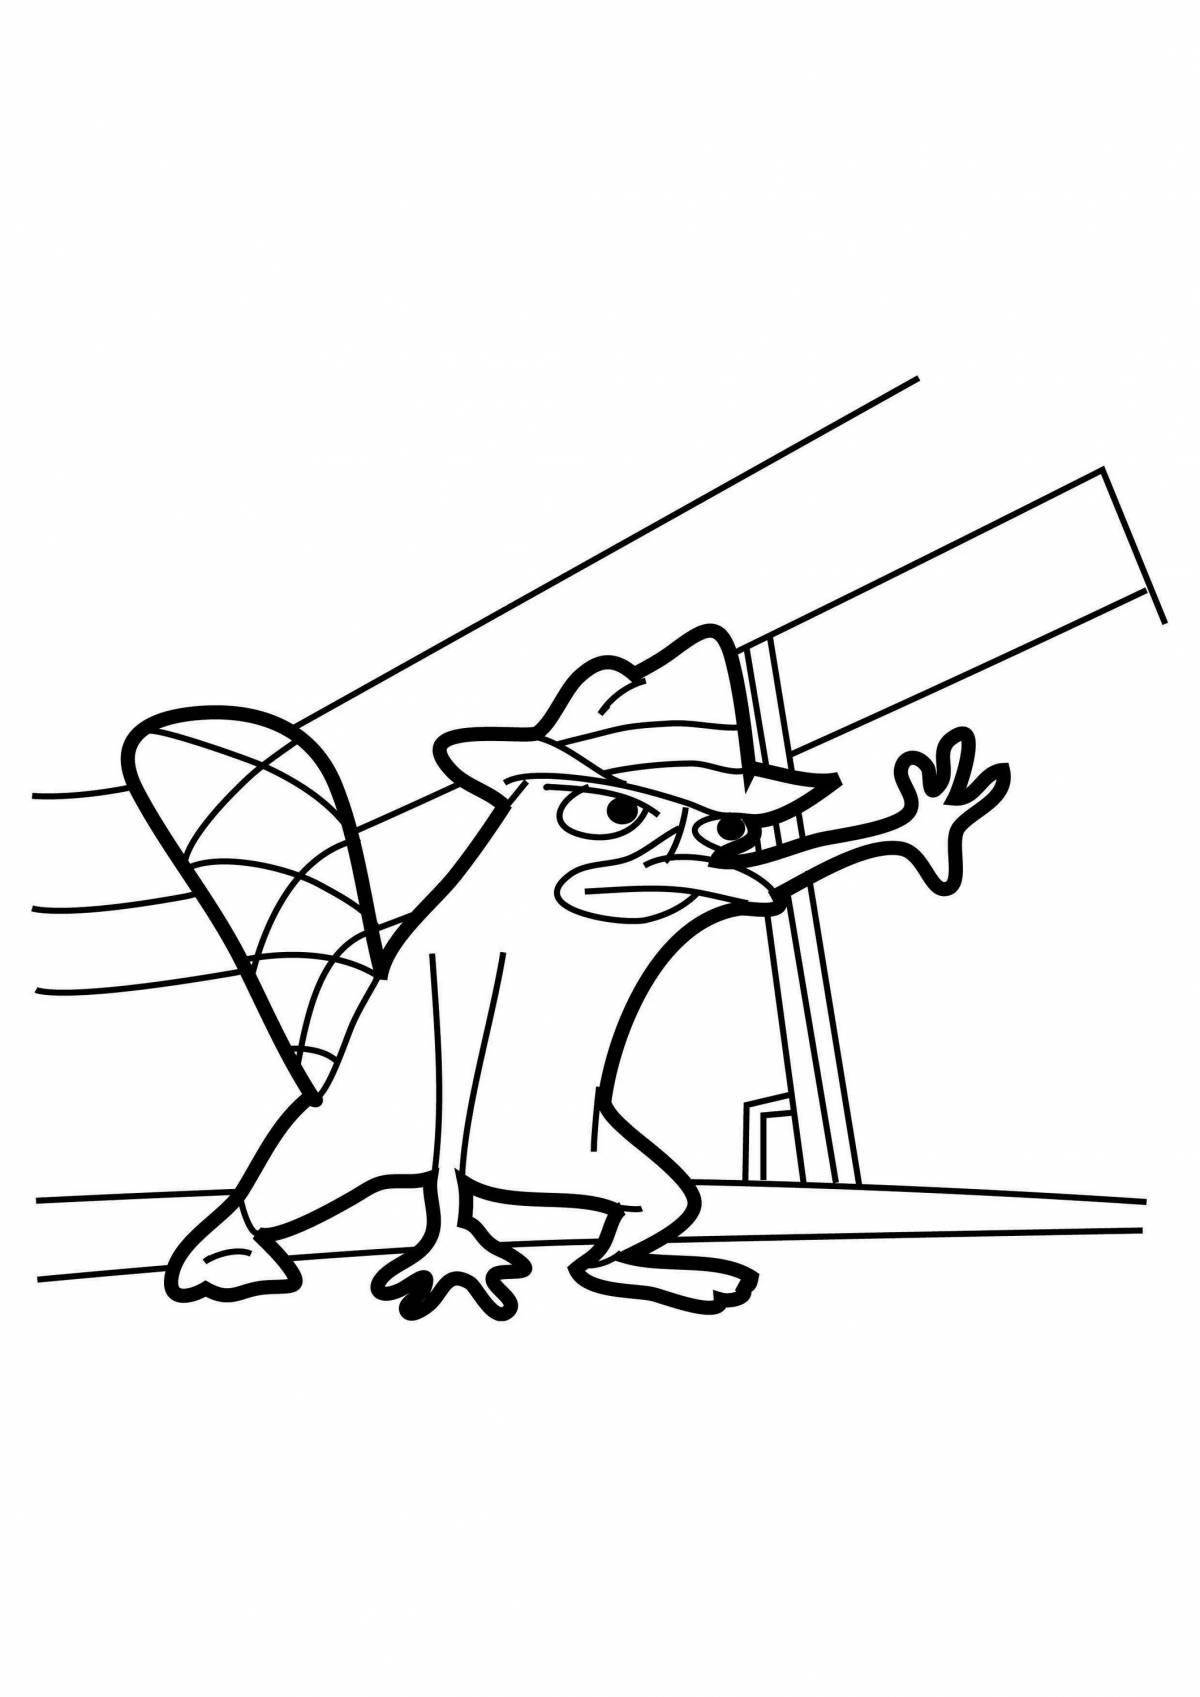 Perry the wonderful platypus coloring page